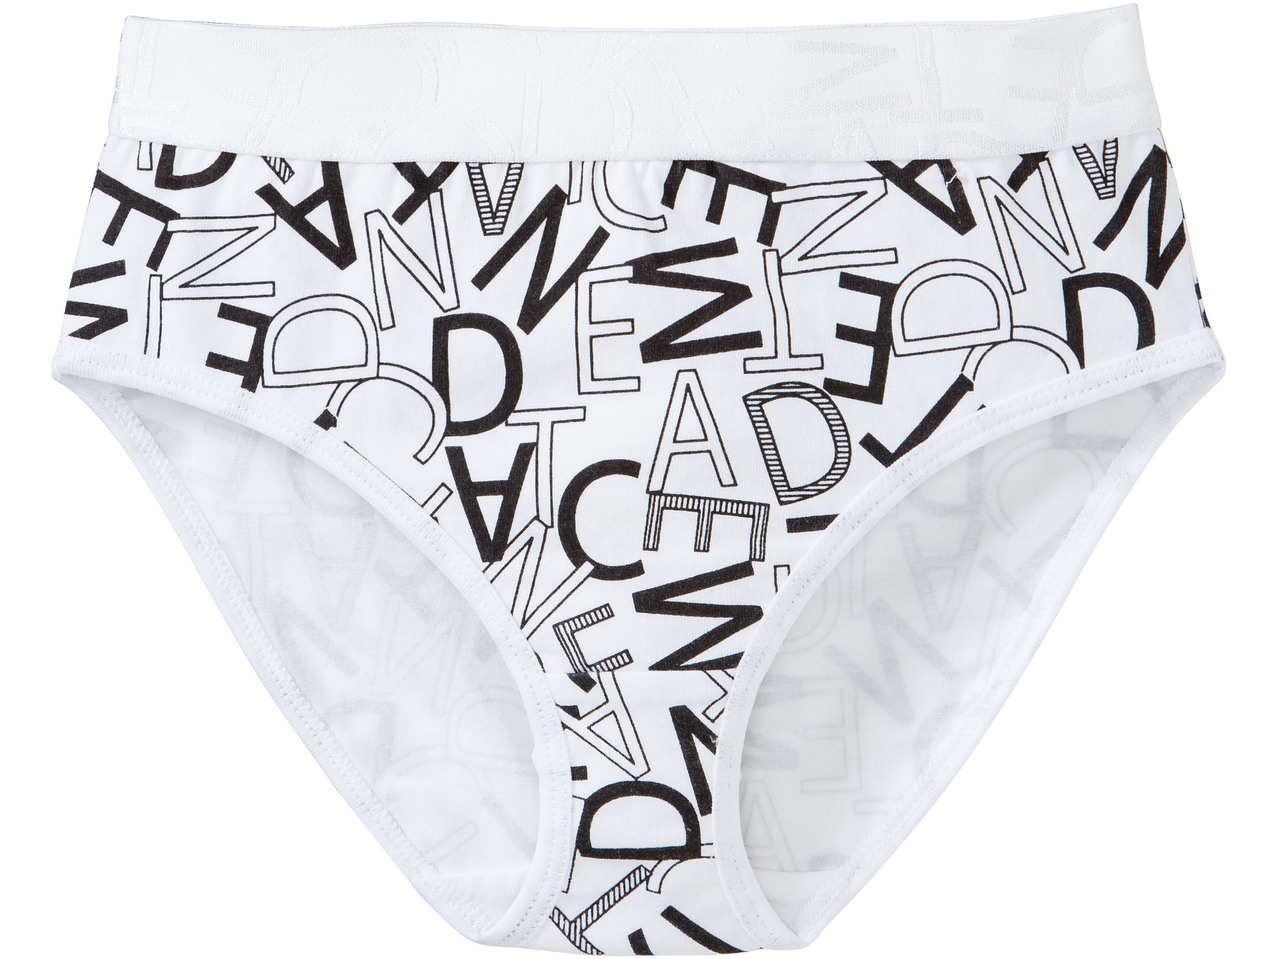 Girl's Briefs or Hipster Briefs, 5 pieces